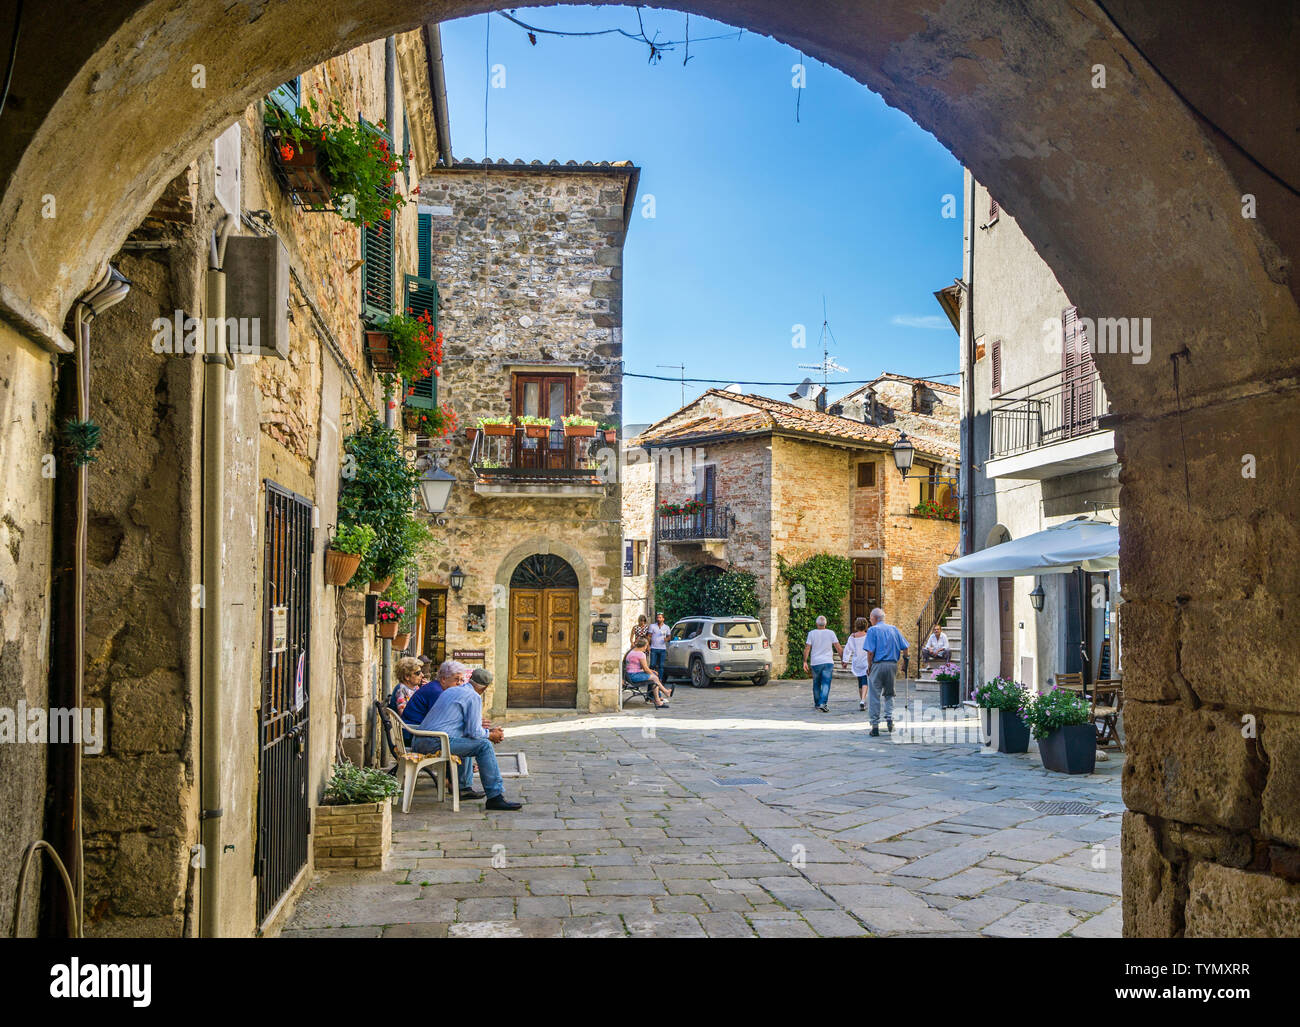 idyllic town square at the medieval hilltop town of Montemerano, Tuscany, Italy Stock Photo